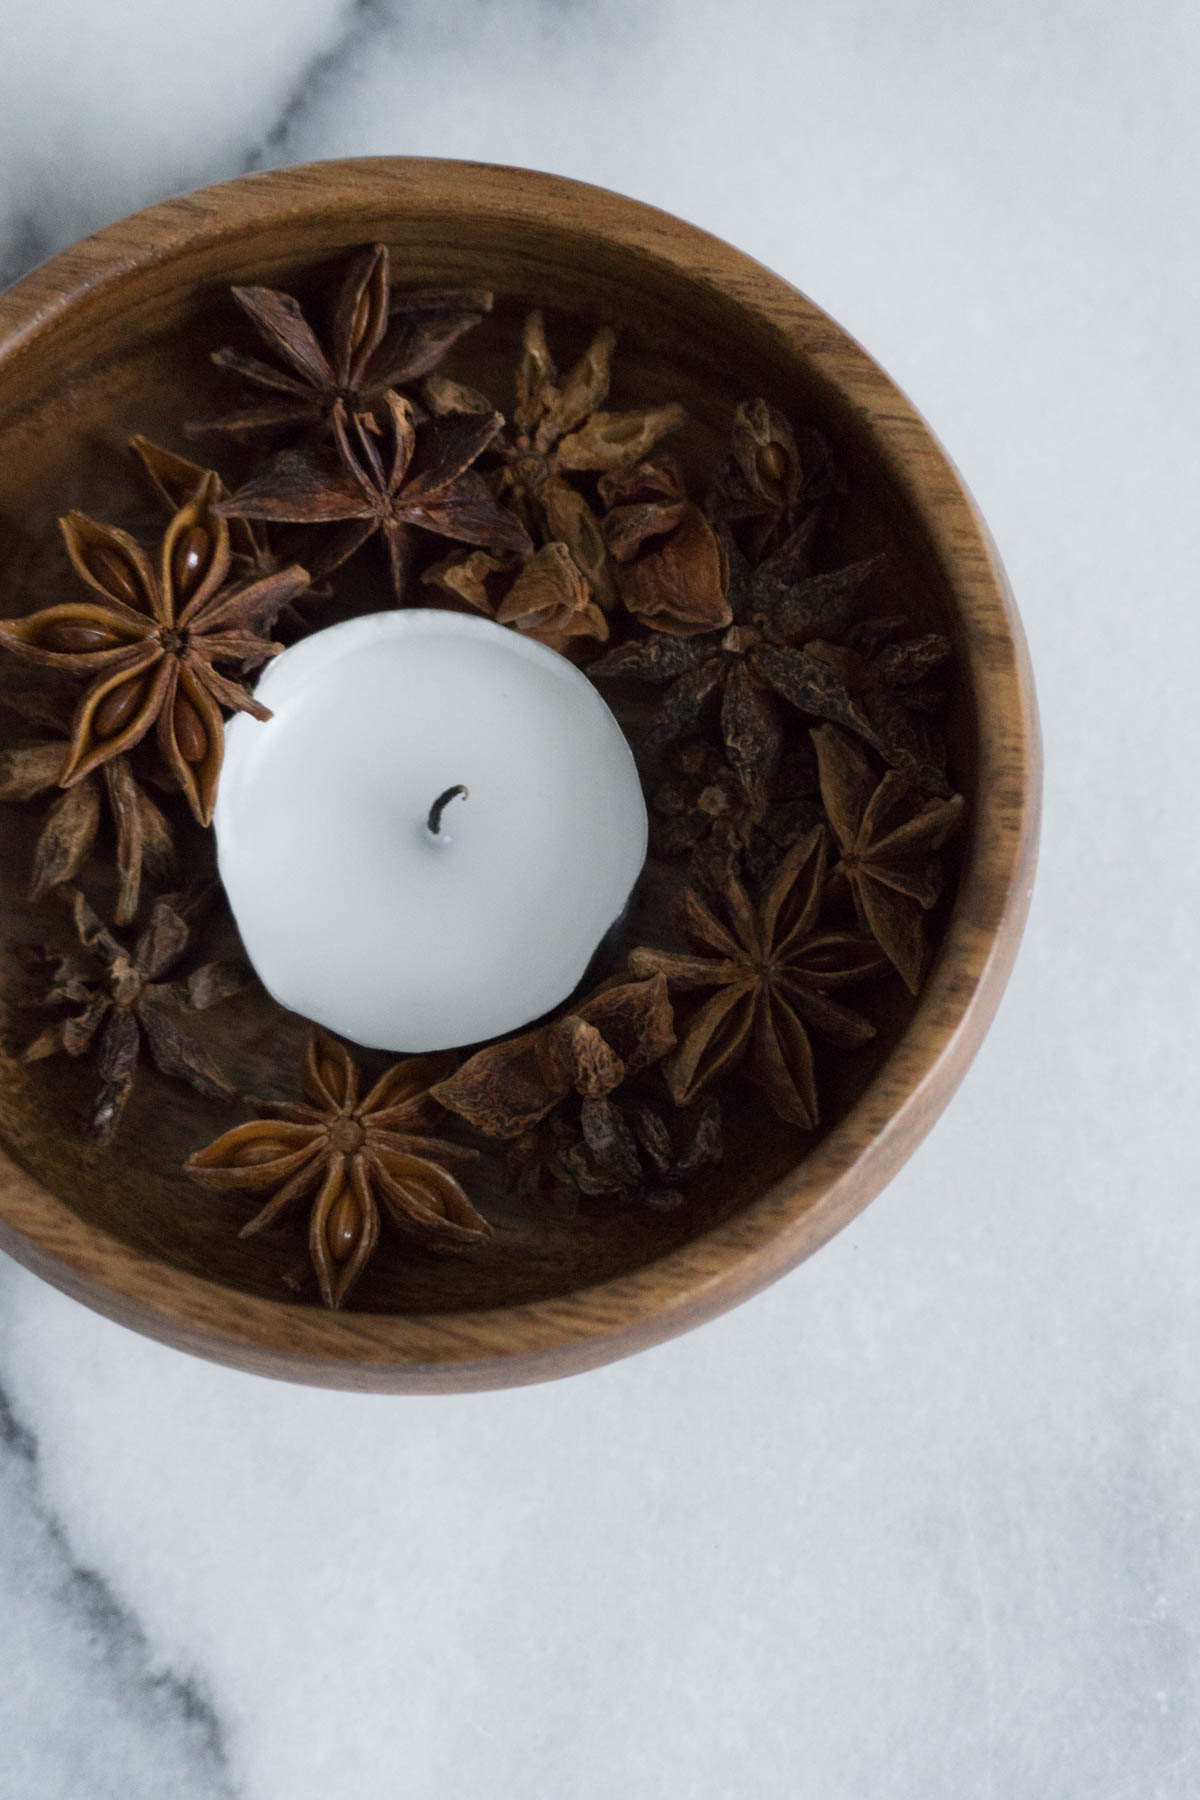 Cozy Minimal Kitchen, Scandinavian Christmas Decor, Spices and Candle - RG Daily Blog